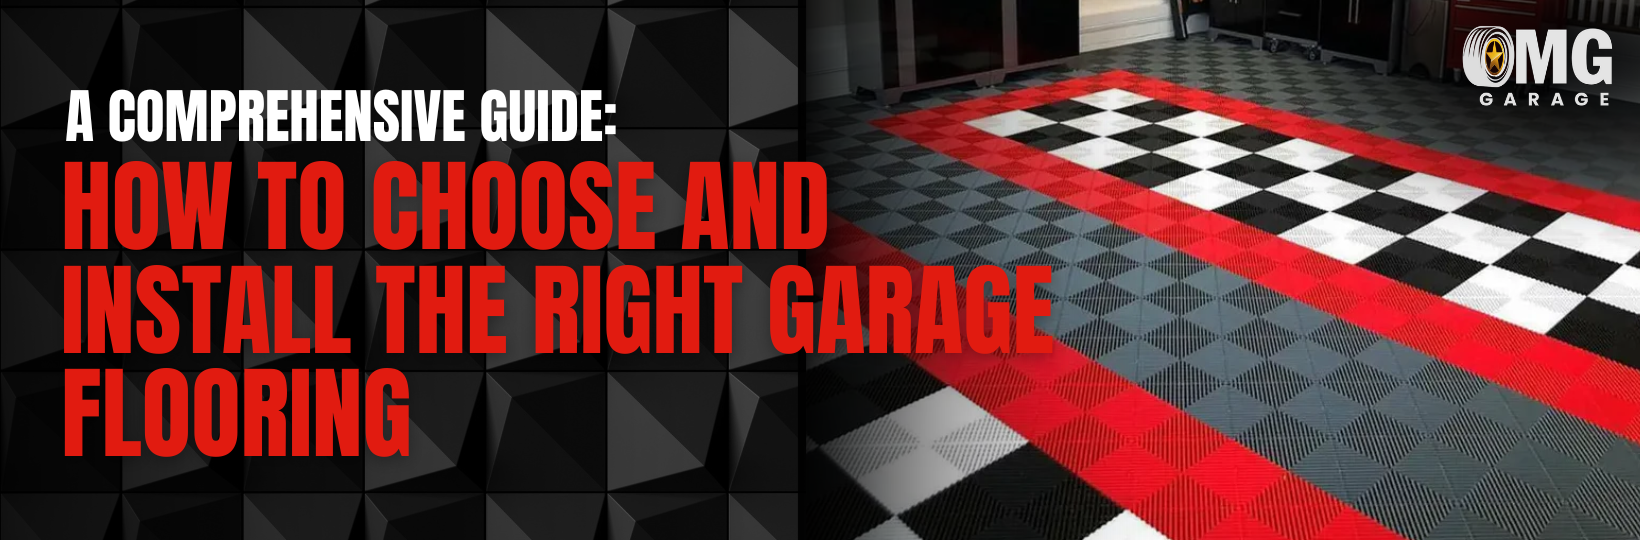 A Comprehensive Guide: How to Choose and Install the Right Garage Flooring